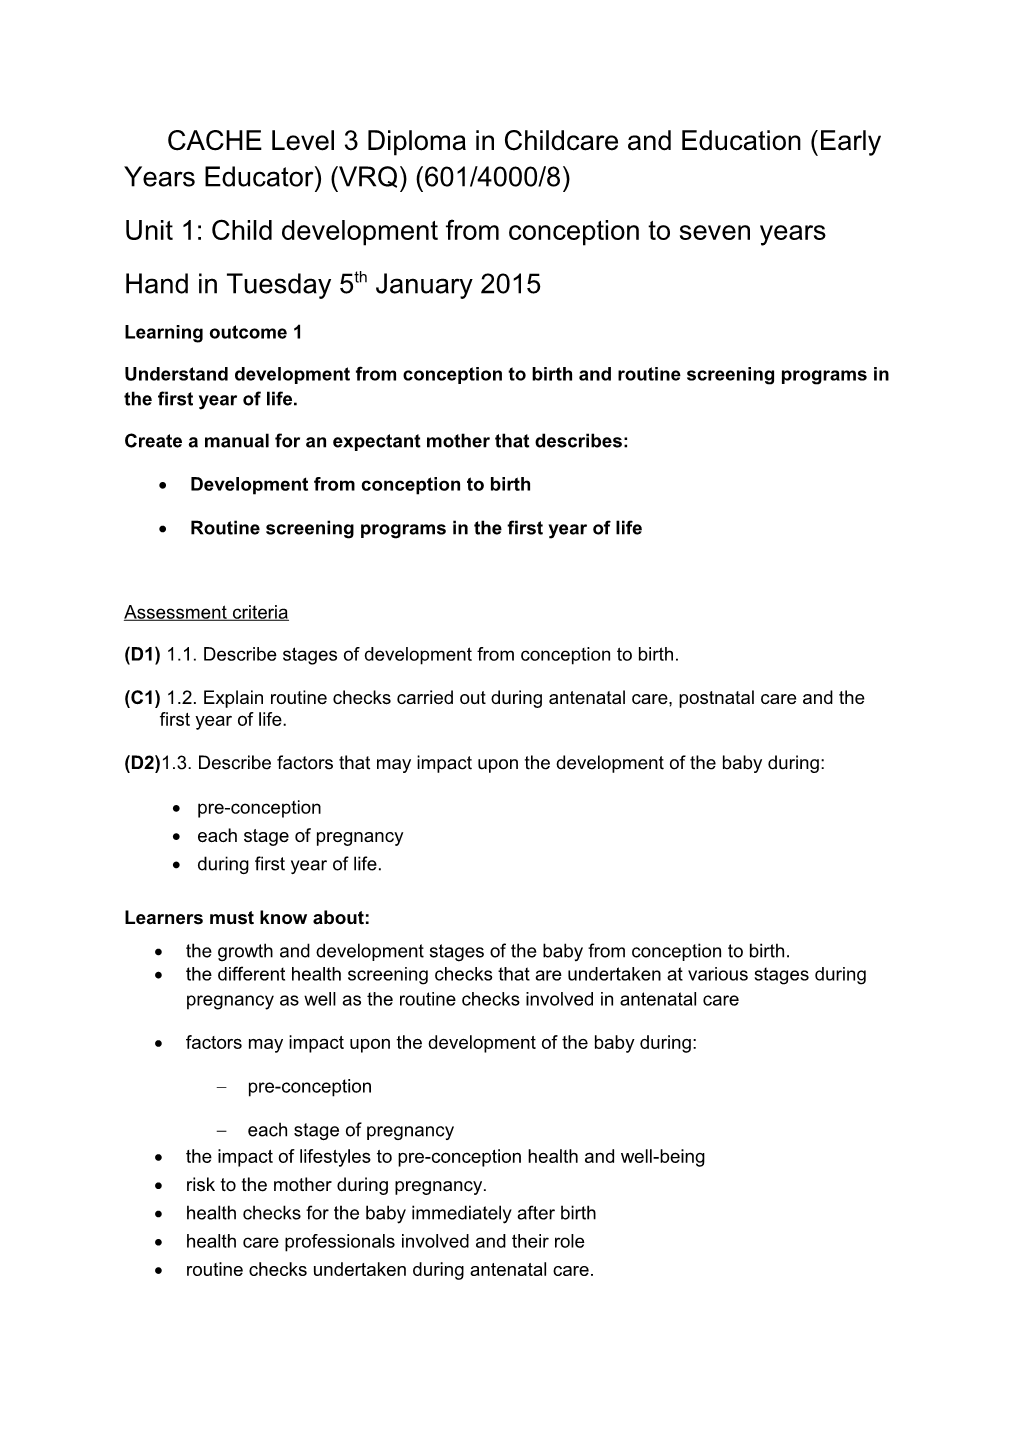 CACHE Level 3 Diploma in Childcare and Education (Early Years Educator) (VRQ) (601/4000/8)